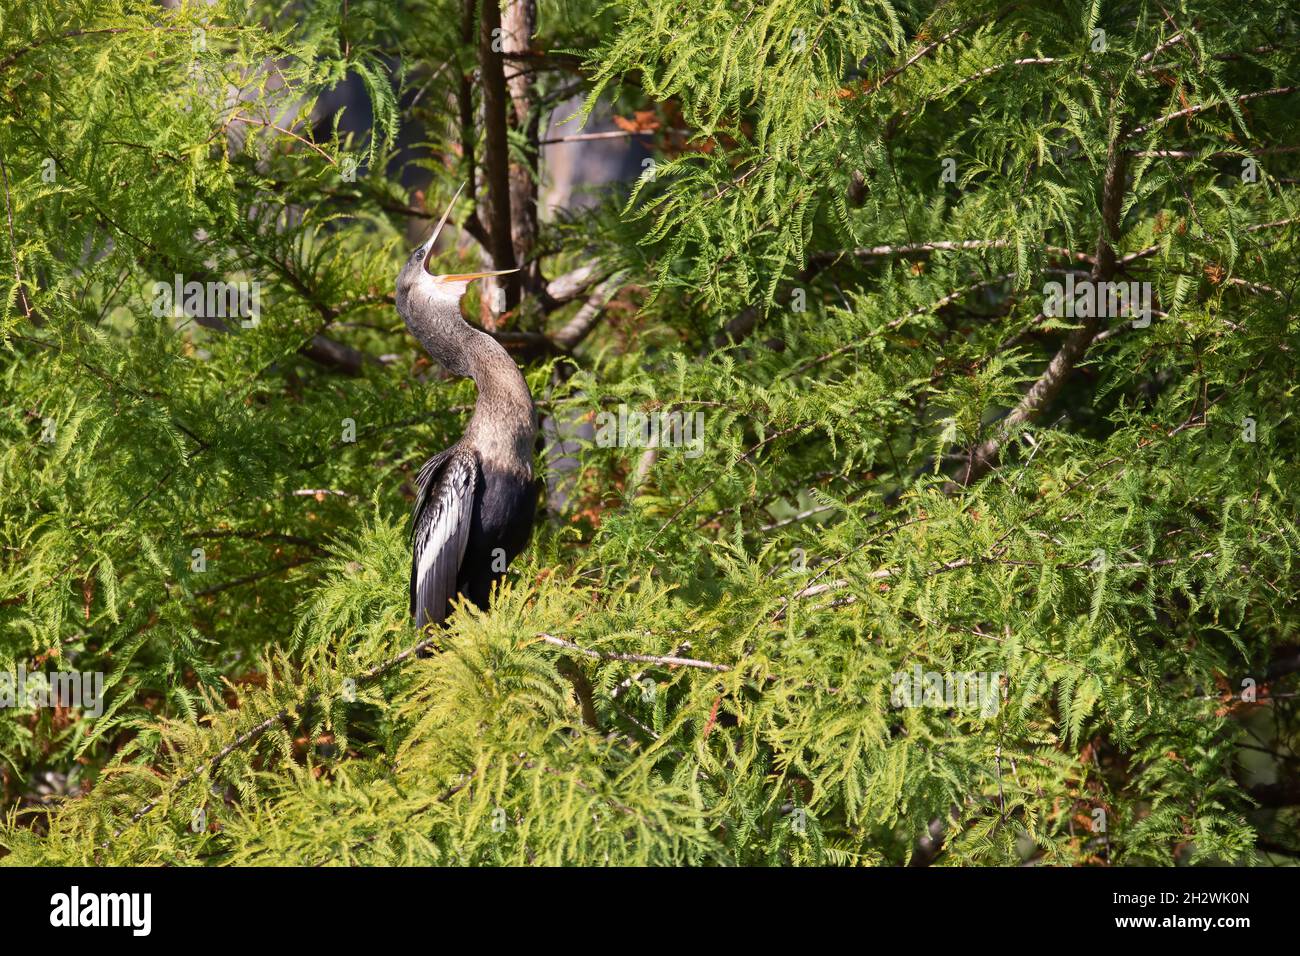 An anhinga perched in a tree with its mouth open. Stock Photo